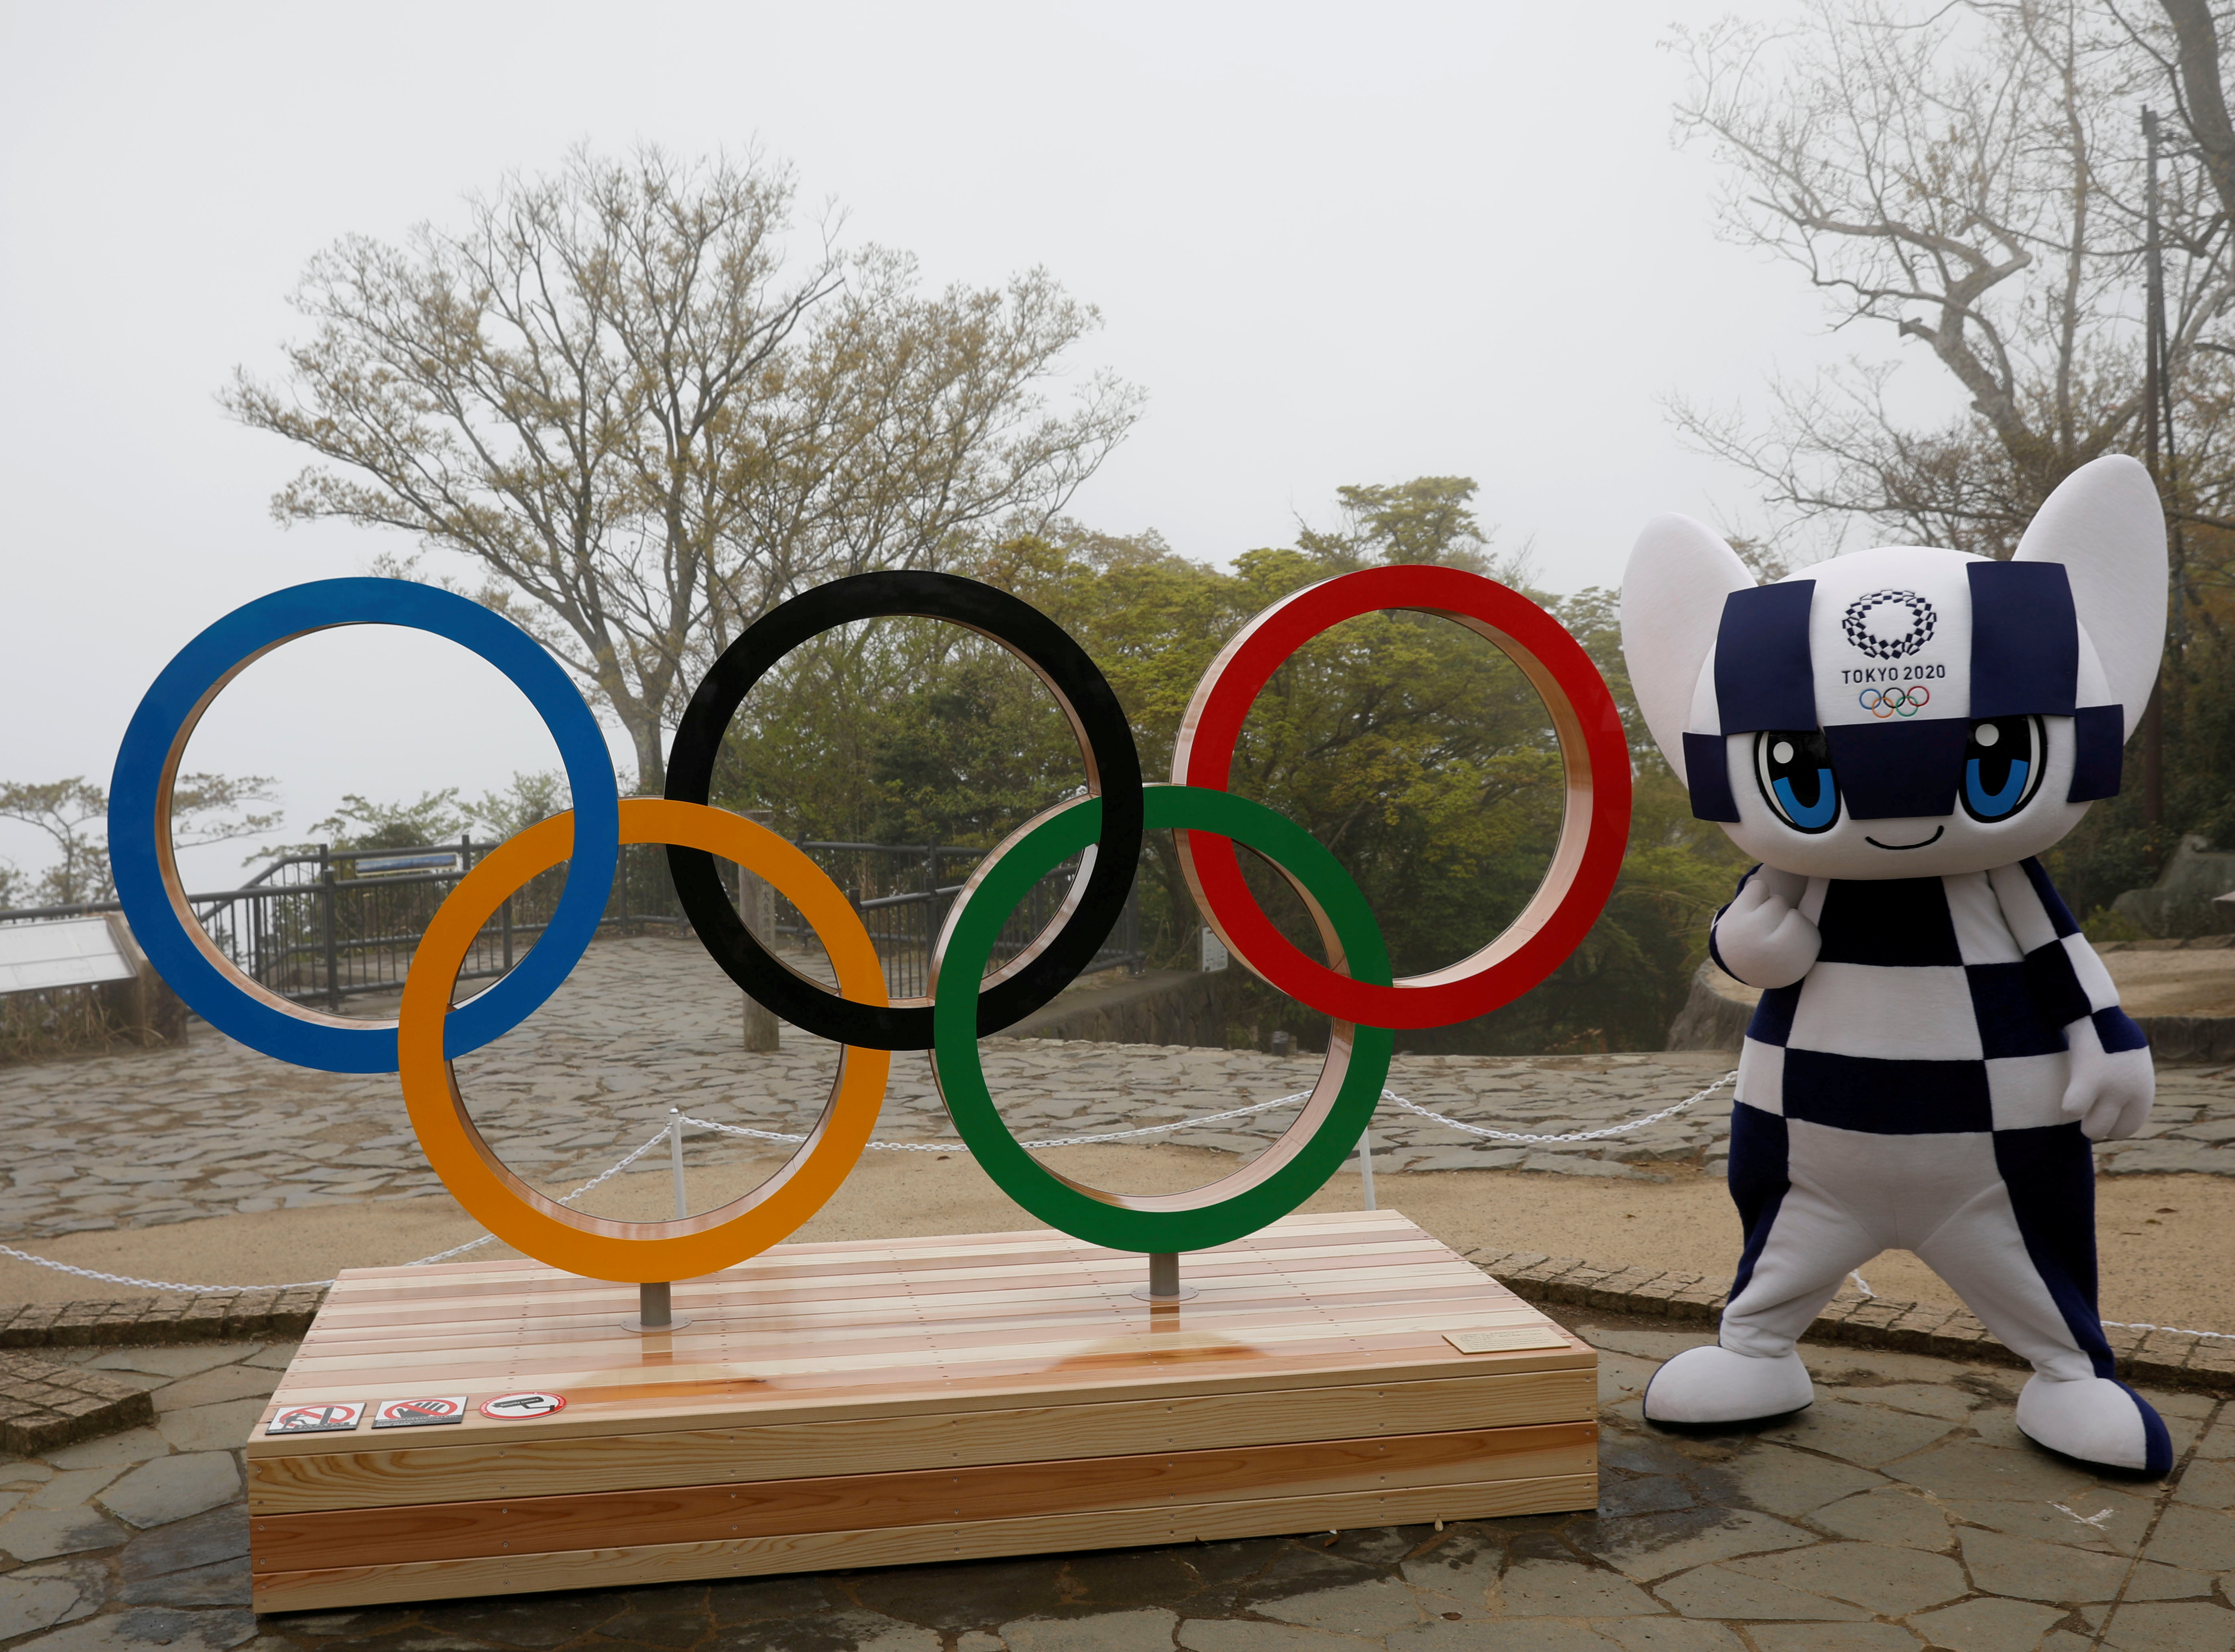 Tokyo 2020 Olympic Games mascot Miraitowa poses with a display of the Olympic symbol after an unveiling ceremony of the symbol on Mt. Takao in Hachioji, west of Tokyo, Japan, April 14, 2021. REUTERS/Kim Kyung-Hoon/Pool